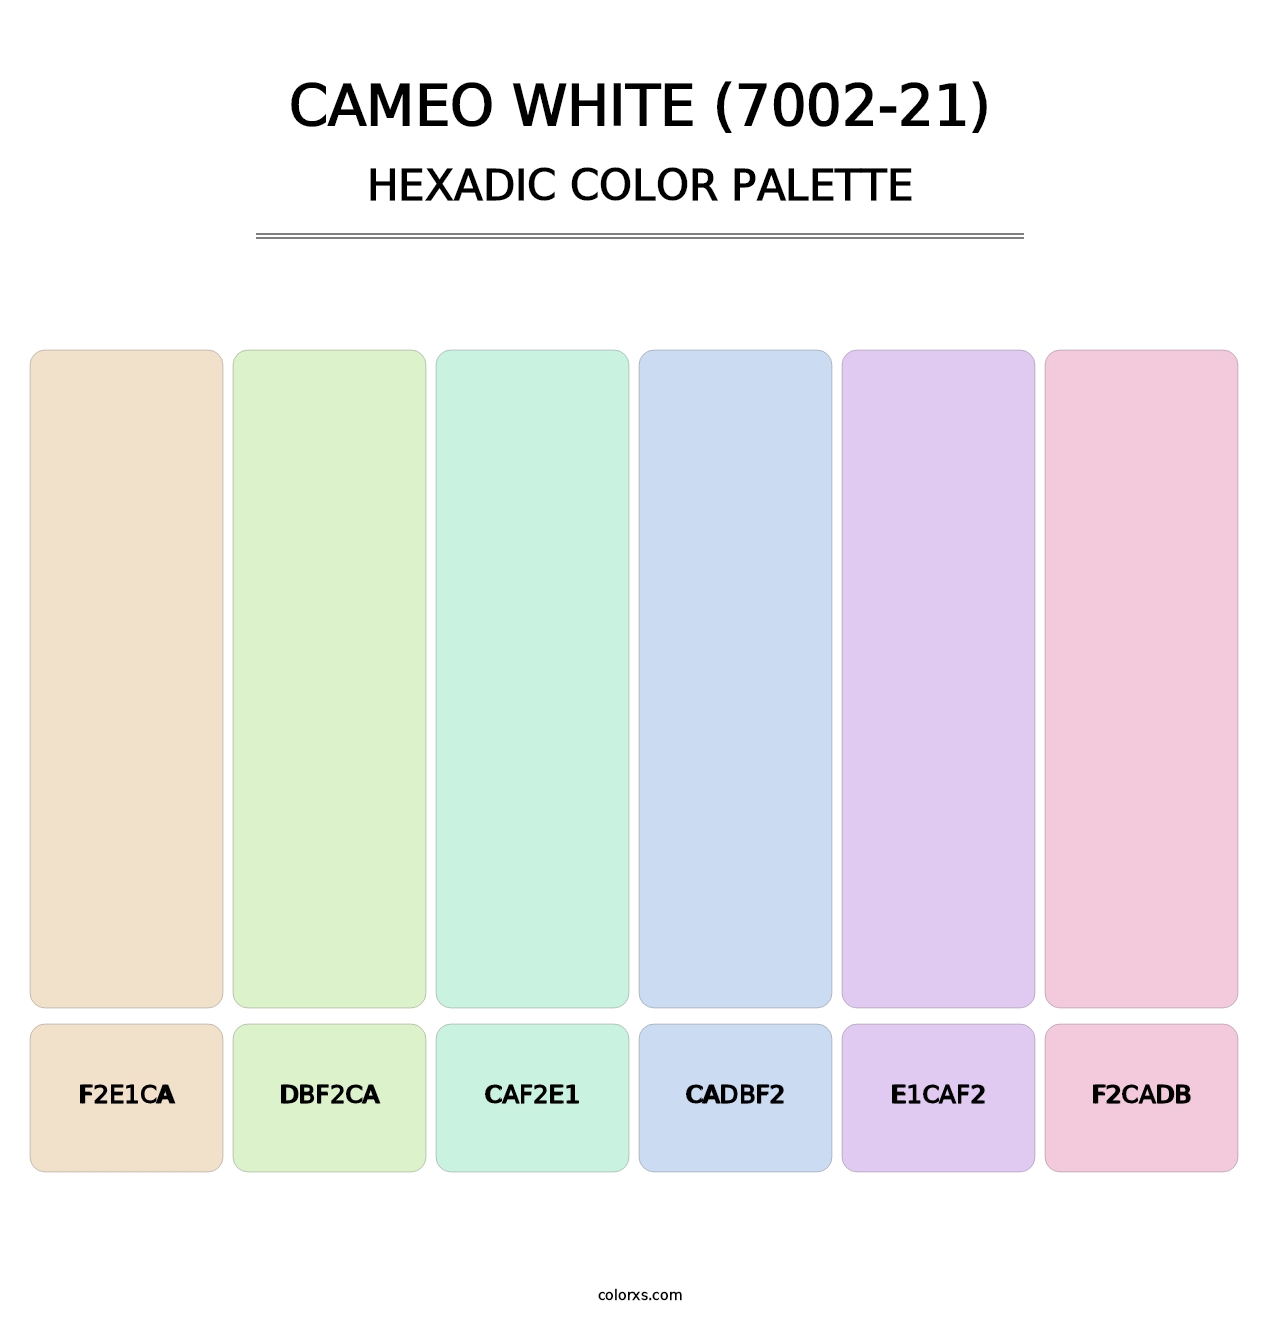 Cameo White (7002-21) - Hexadic Color Palette